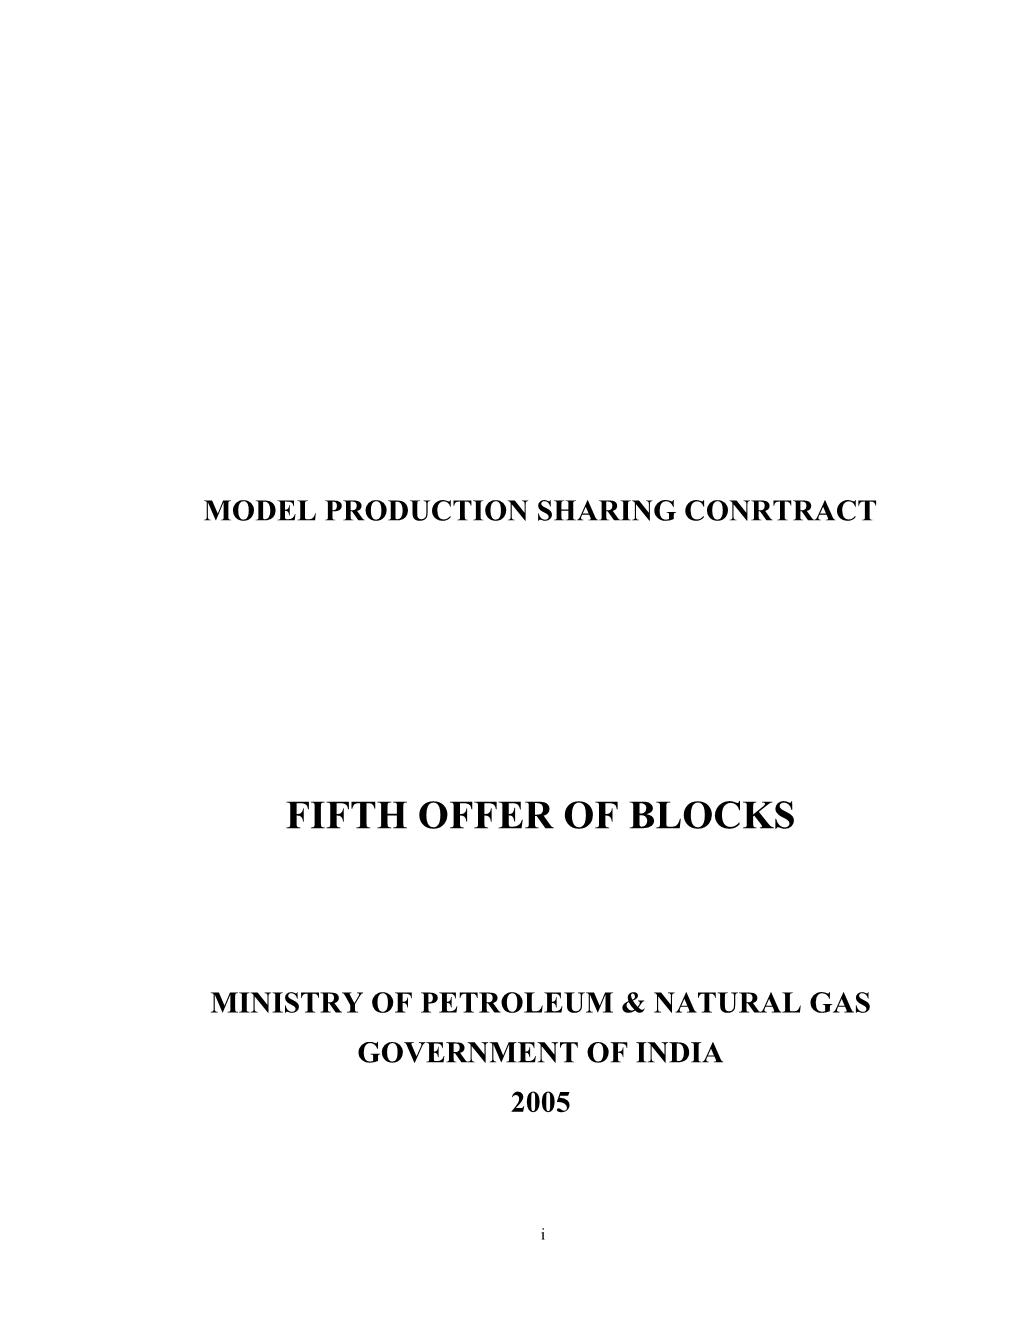 Model Production Sharing Contract